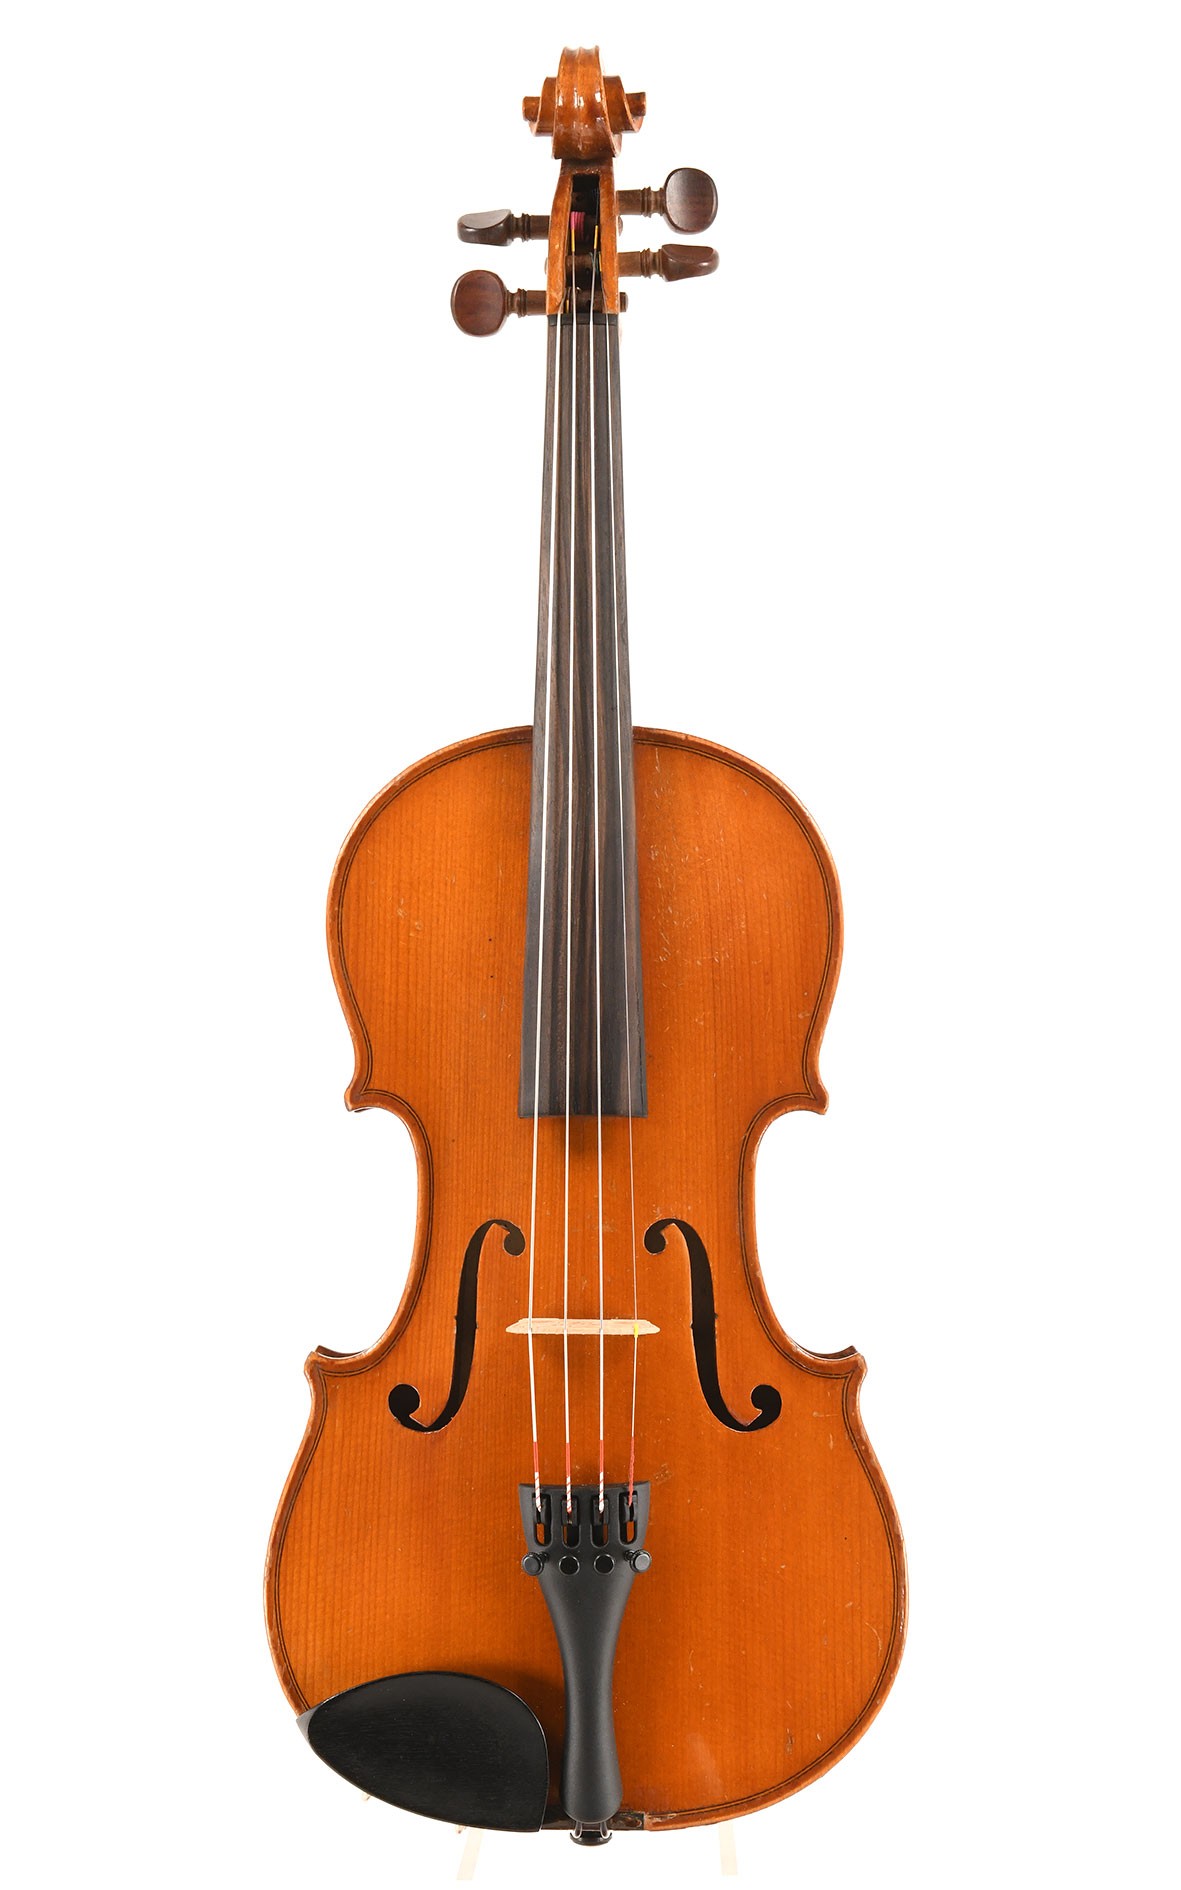 Old French 3/4 violin made in approx. 1910 of the brand Mansuy by Laberte